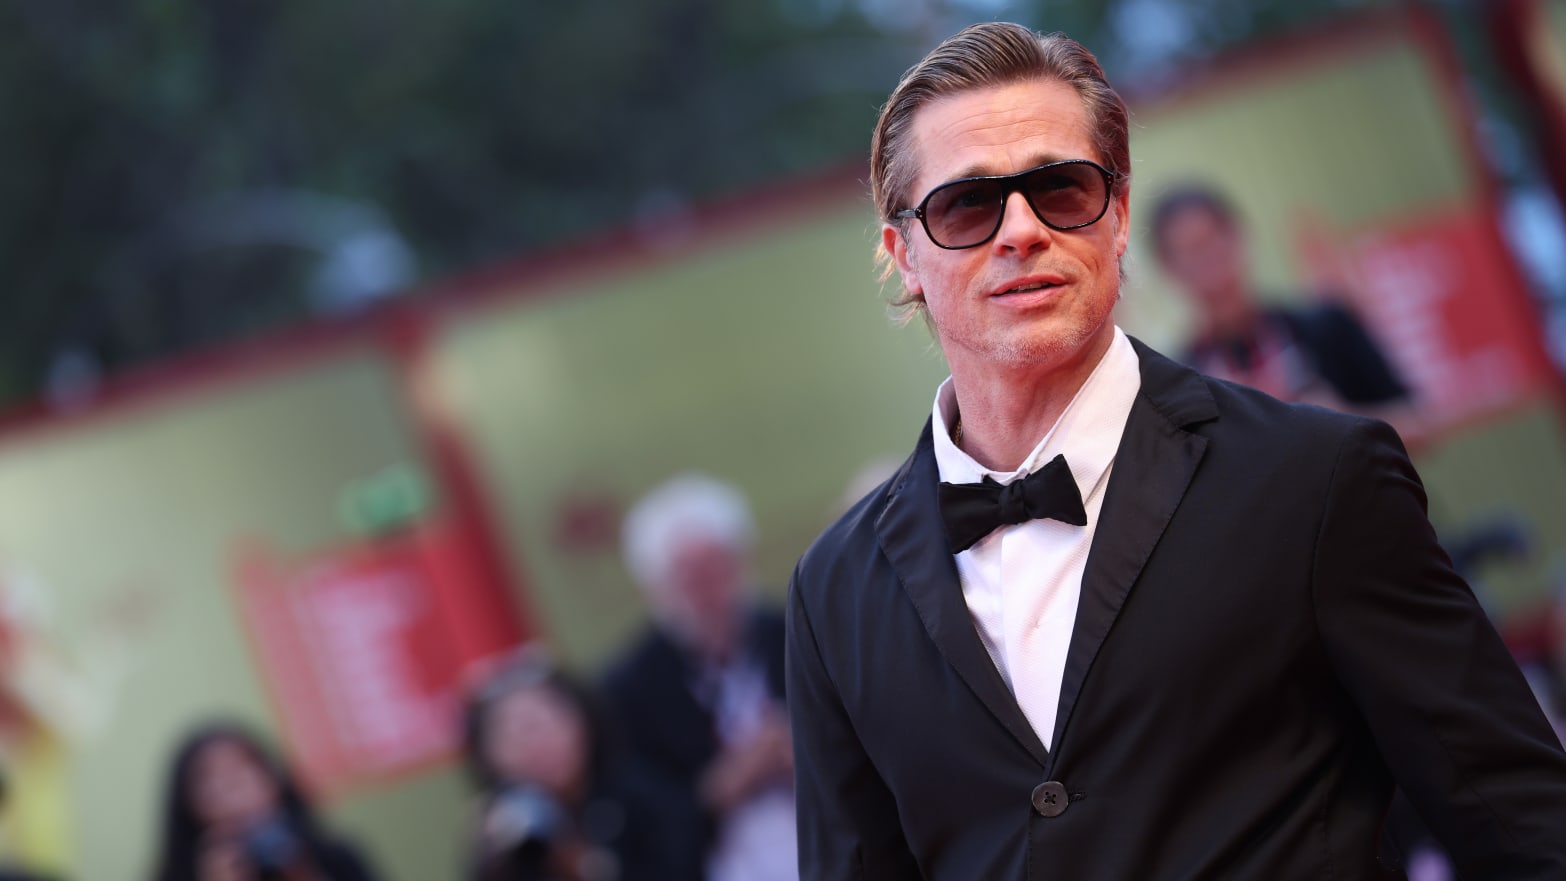 Brad Pitt Will Become A Star Again After The Next Awards Season